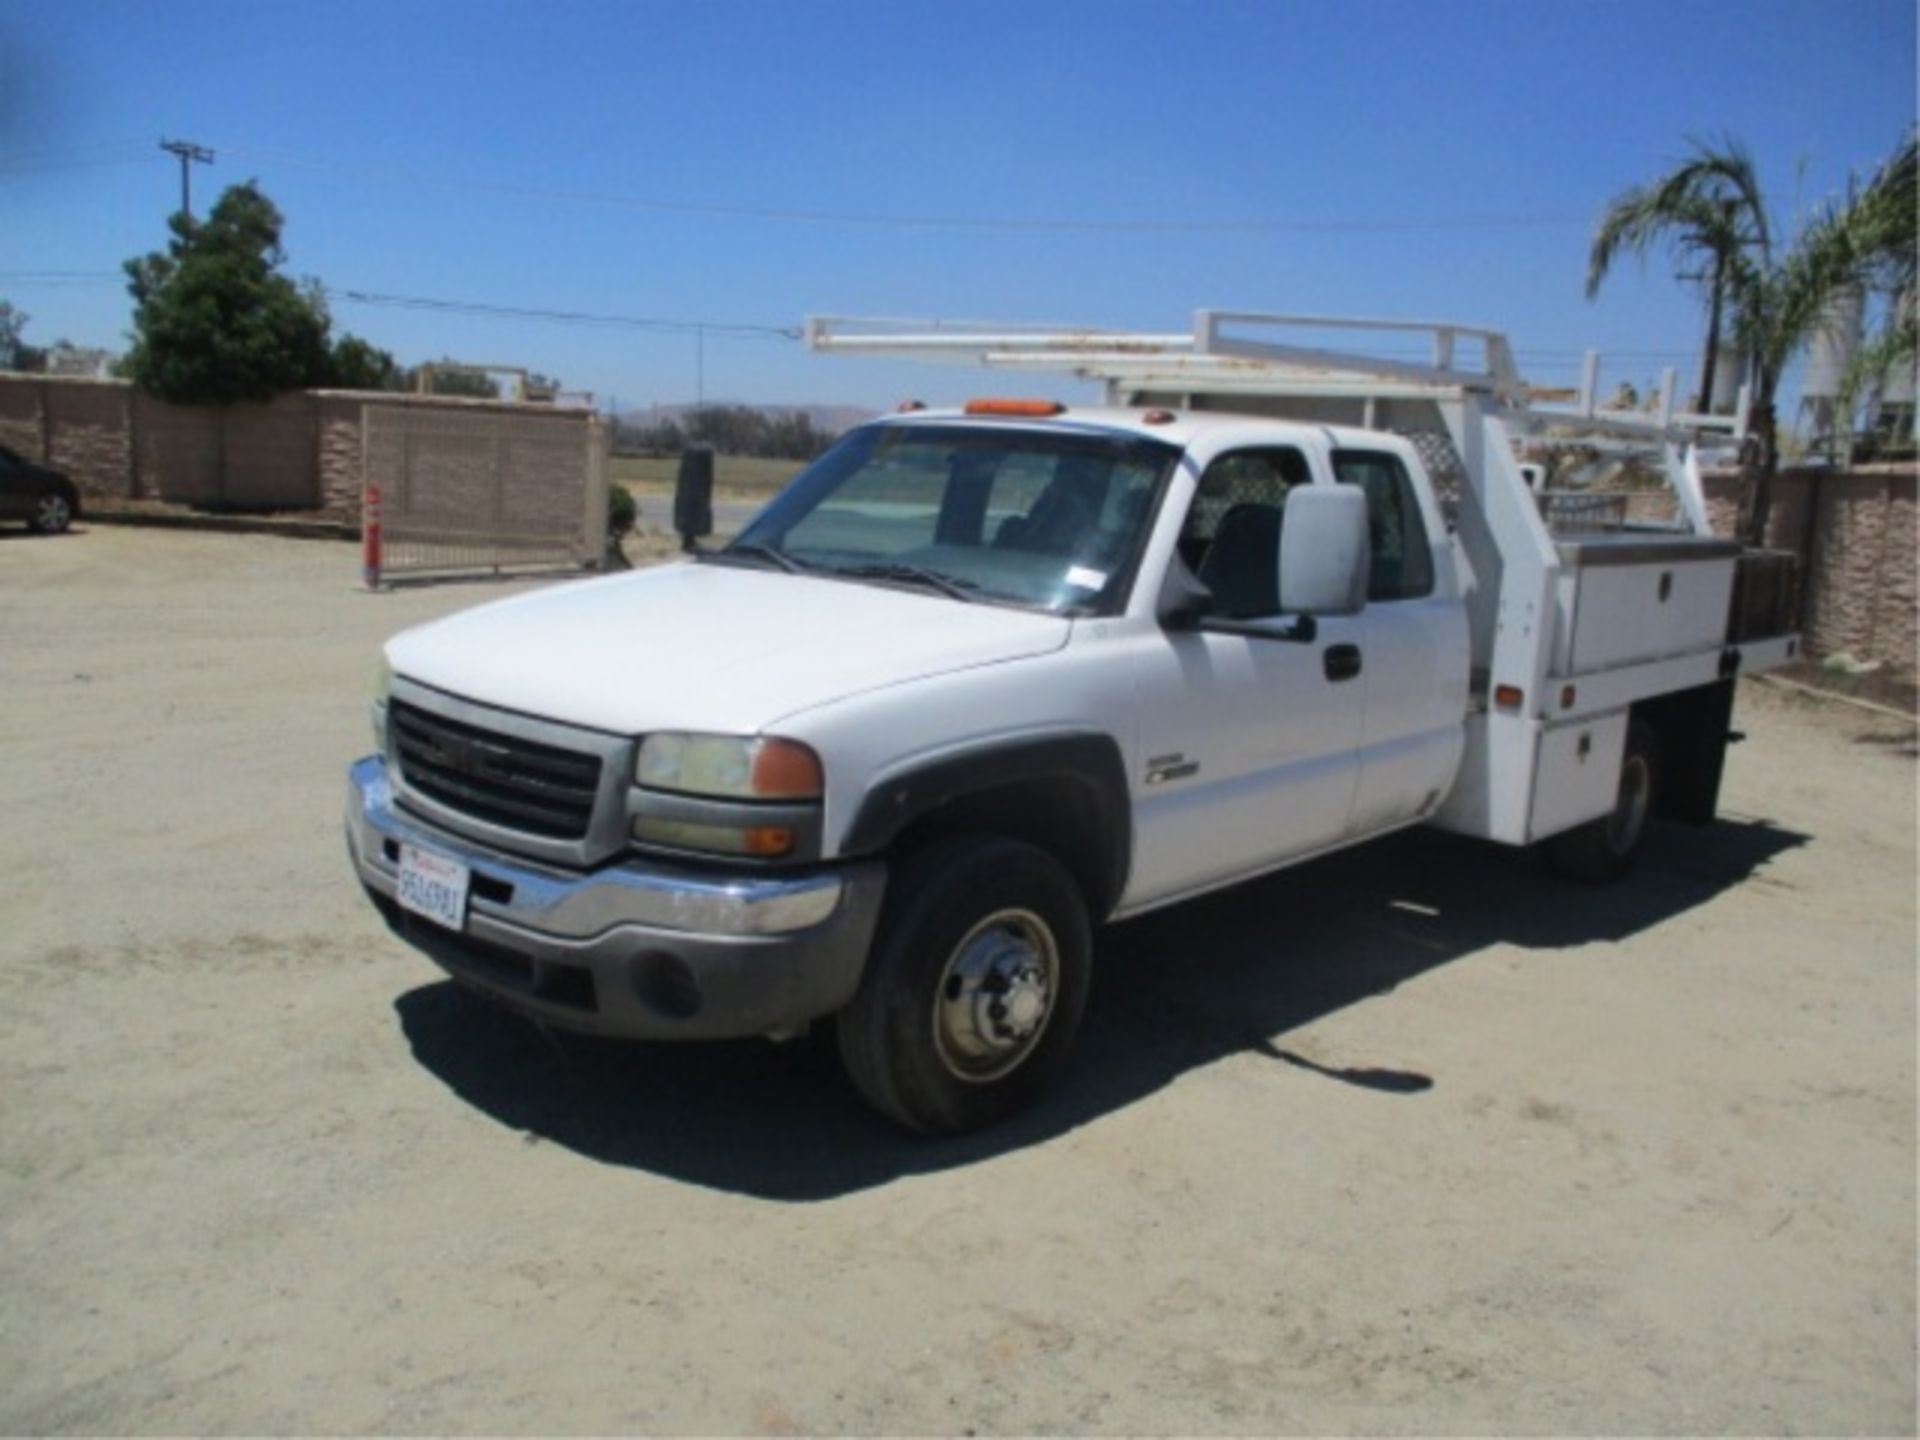 2006 Chevrolet 3500 Extended-Cab Utility Truck, 6.6L Turbo Diesel, Automatic, Tool Boxes, Lumber